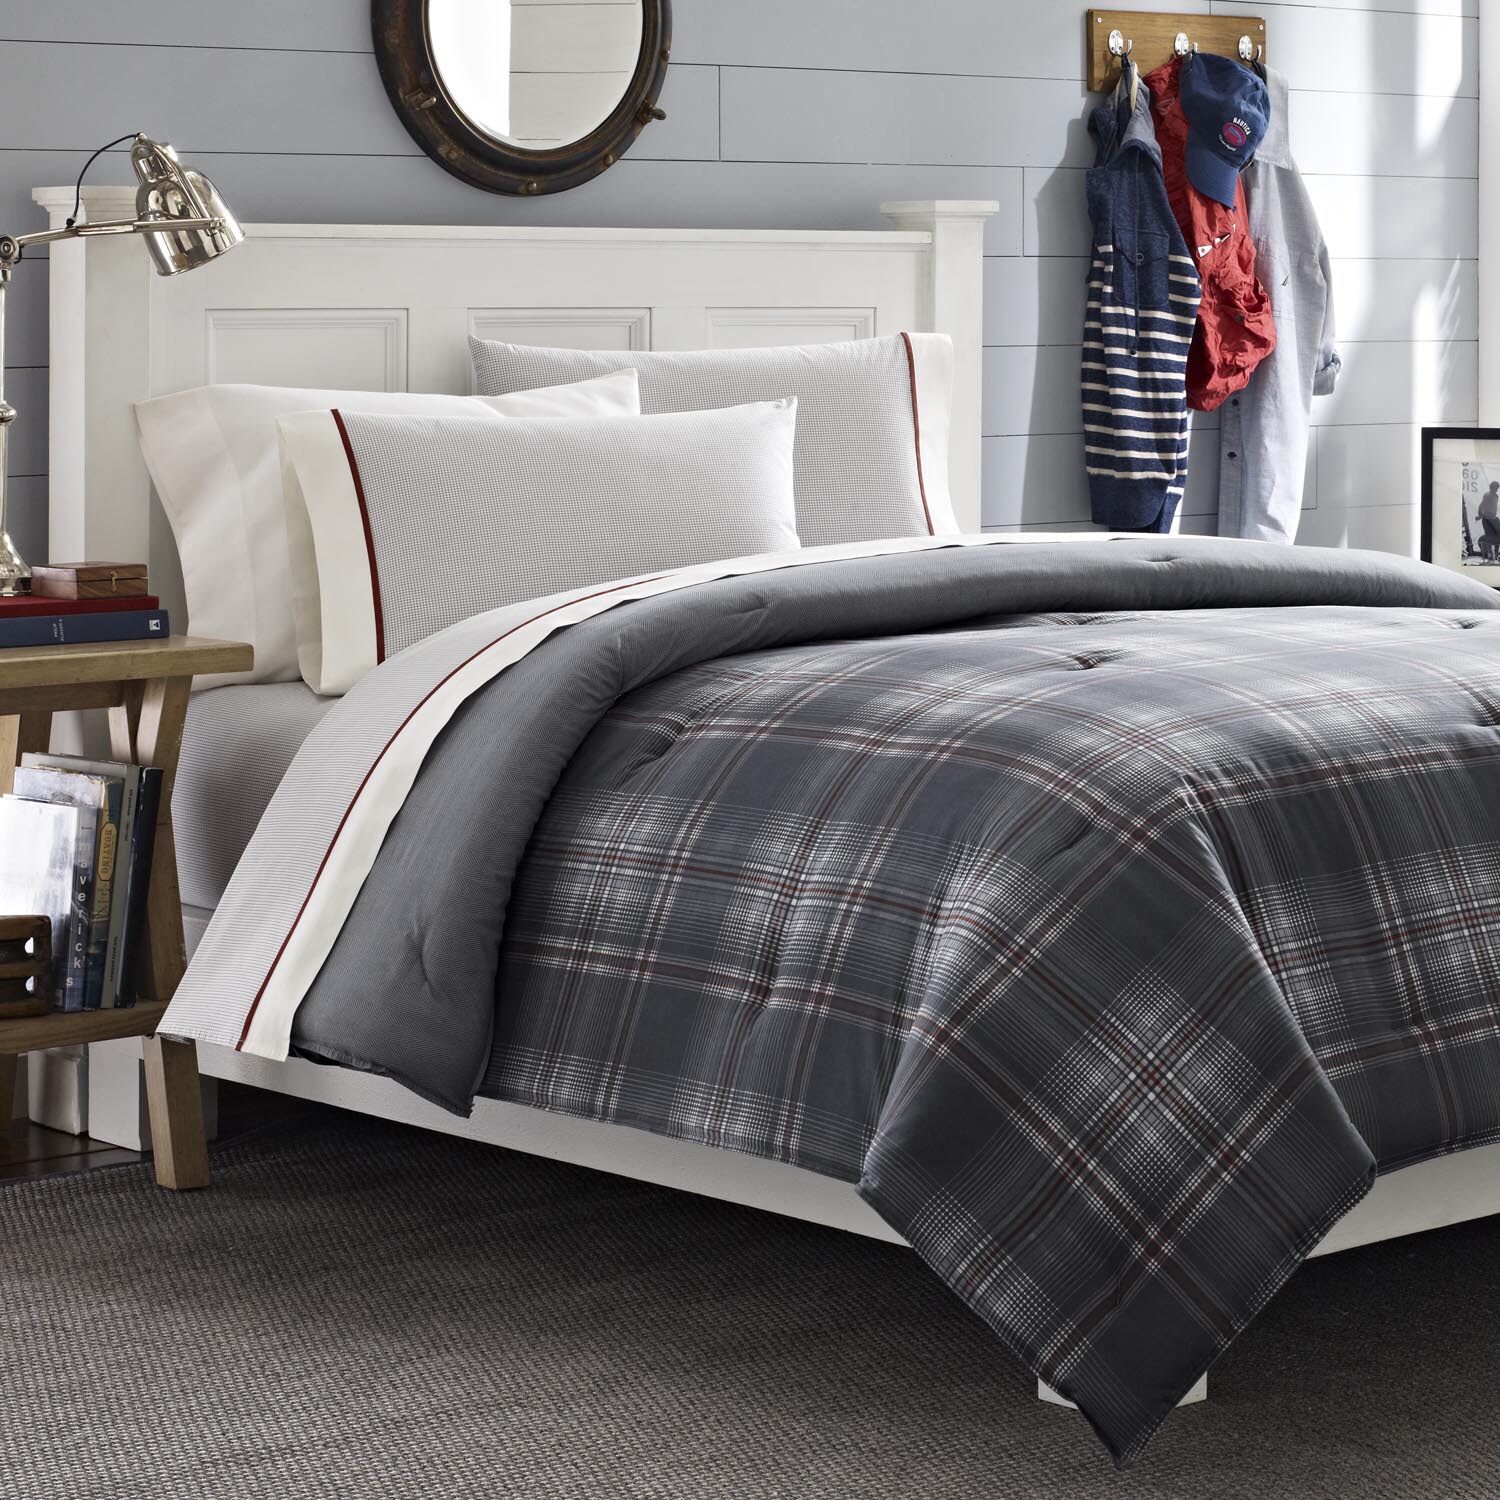 Shop Nautica Grovesdale Cotton 5-piece Bed in a Bag with Sheet Set ...